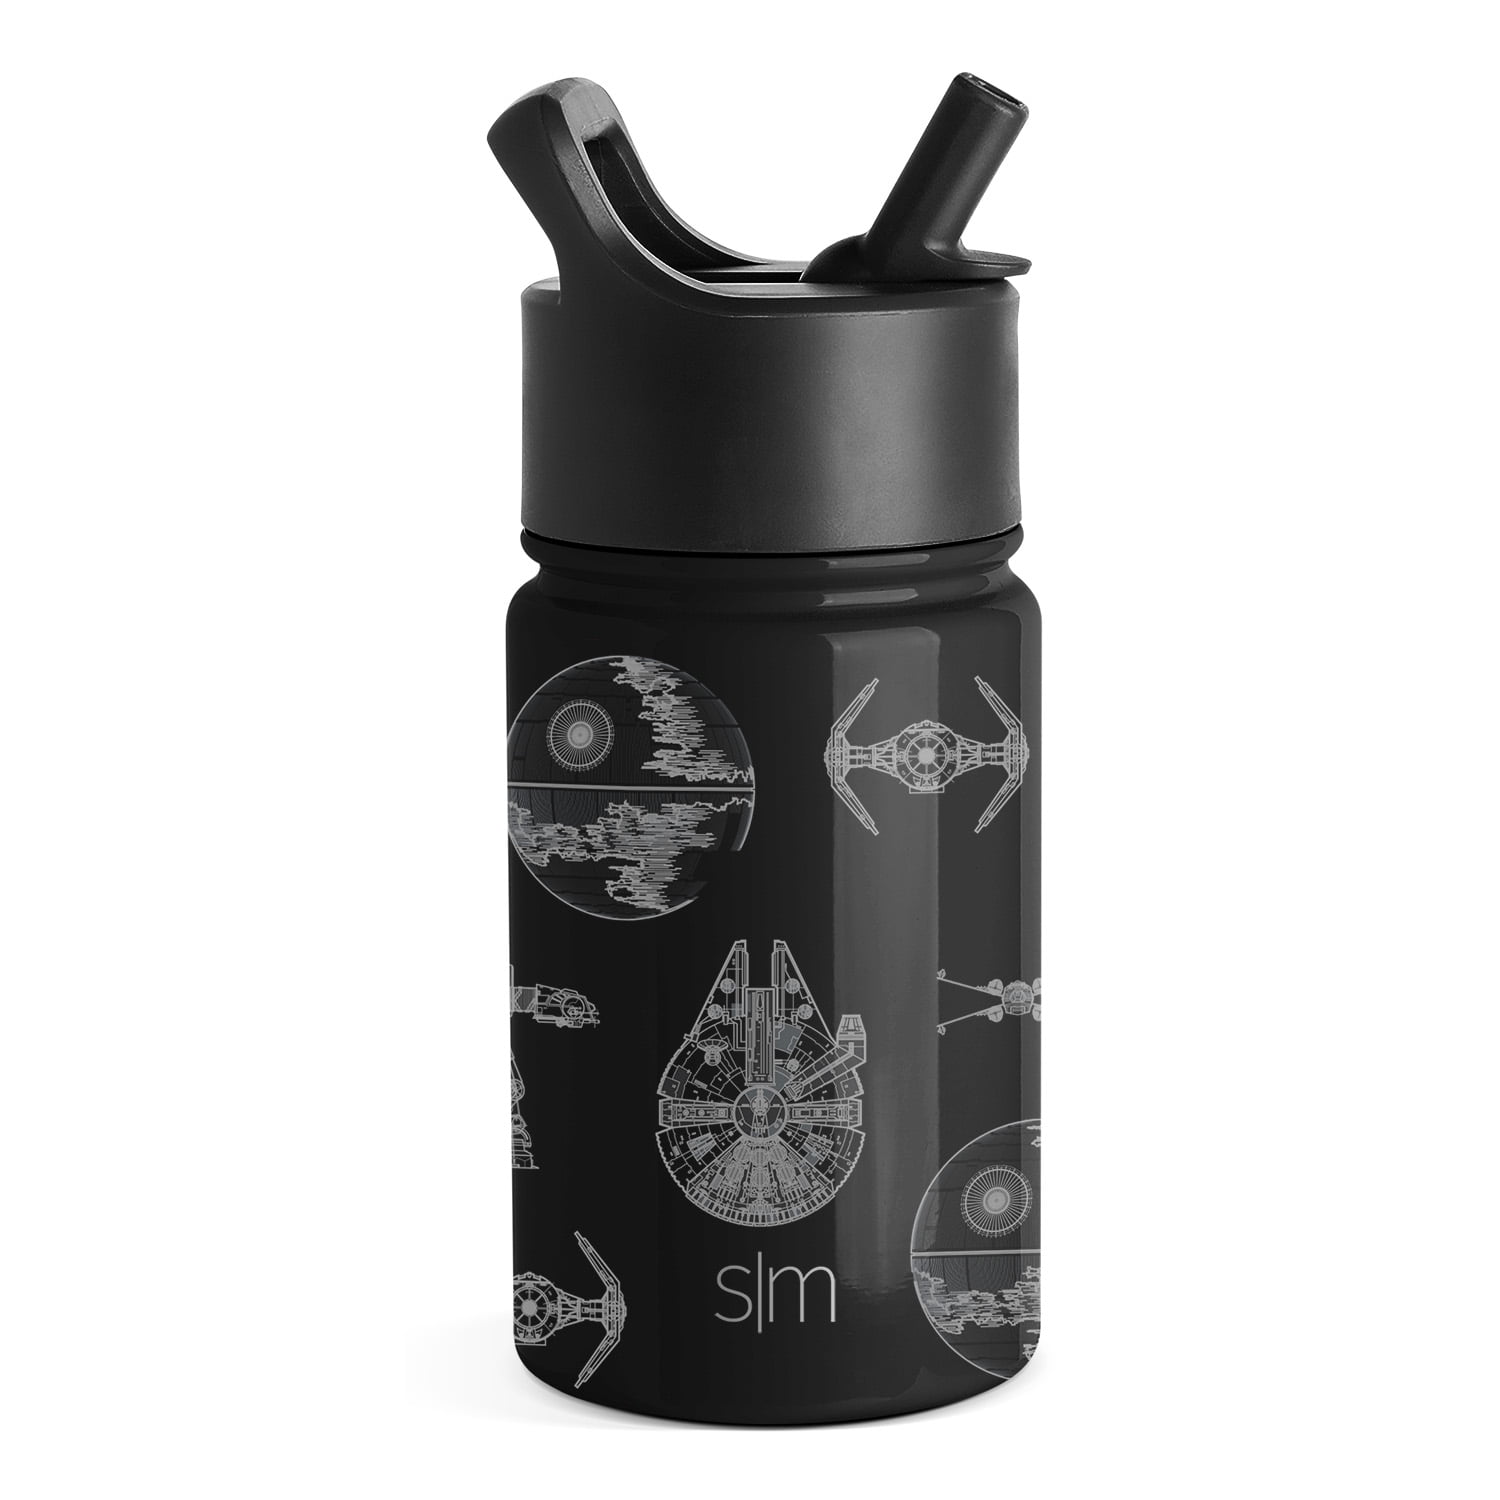 Grogu Stainless Steel Water Bottle with Built-In Straw – Star Wars